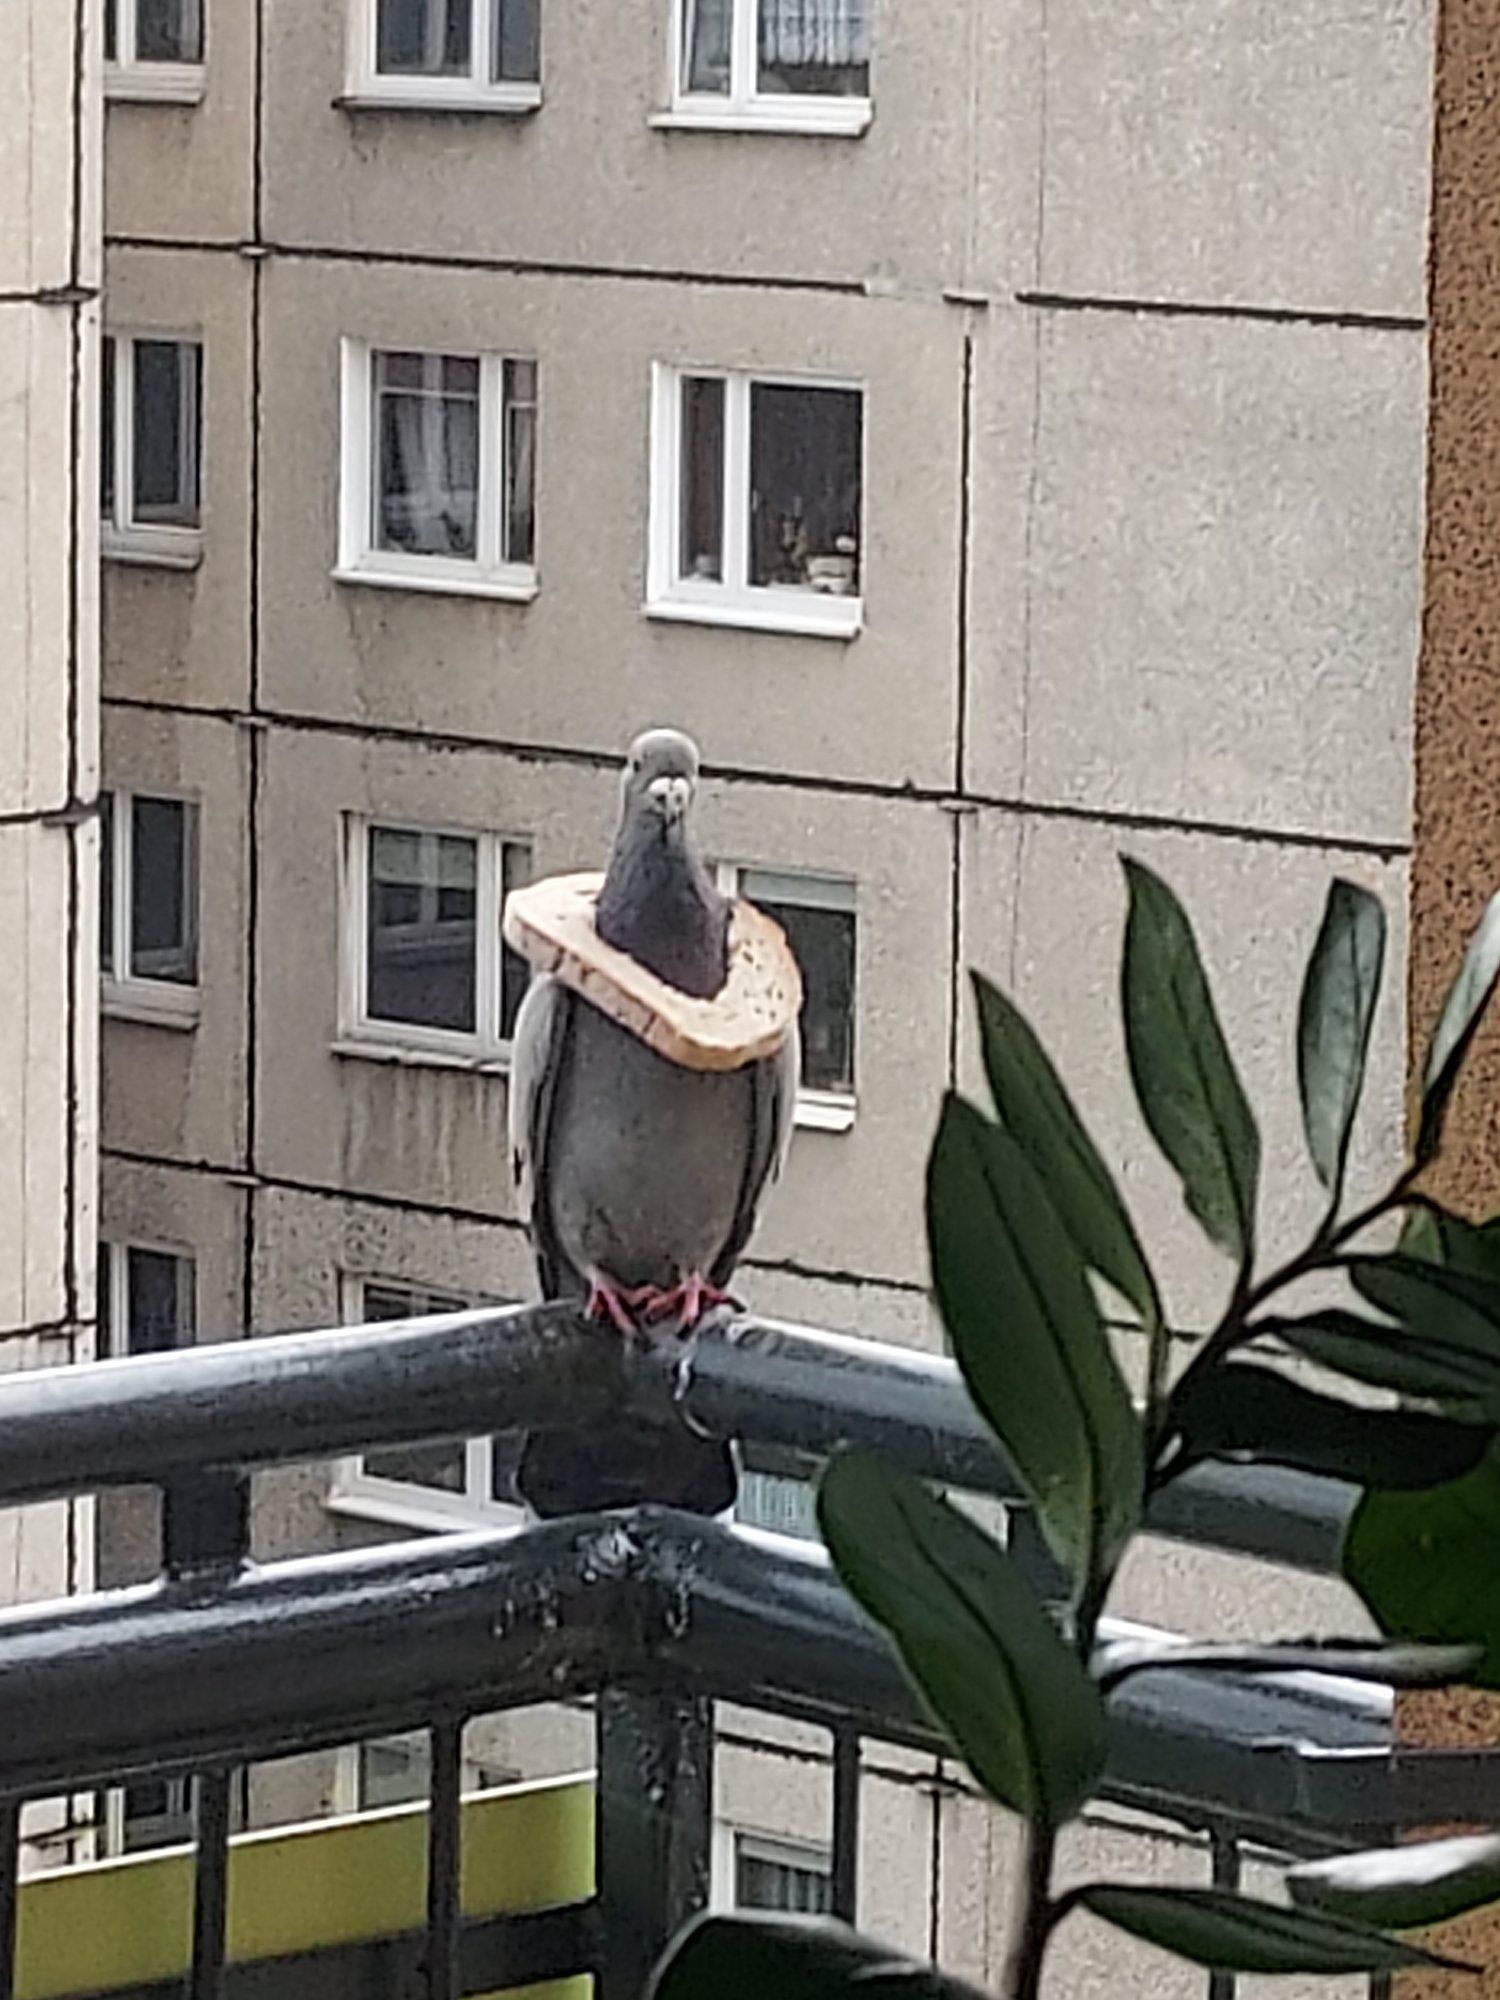 This pigeon has just flown onto my balcony...